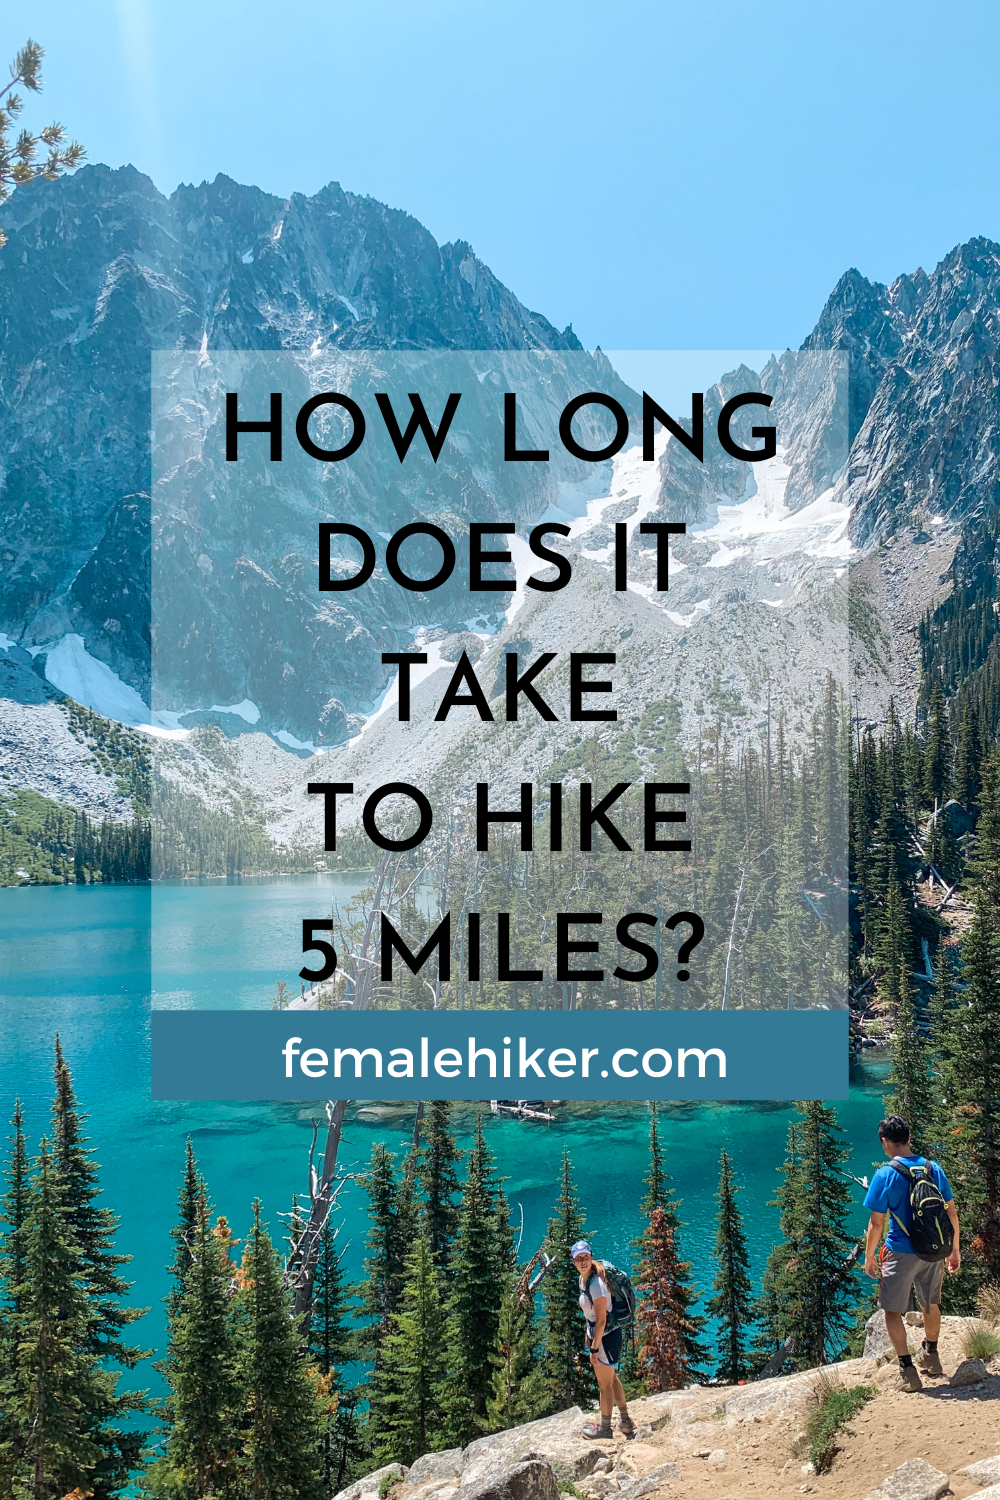 How Long Does it Take to Hike 5 Miles? 34